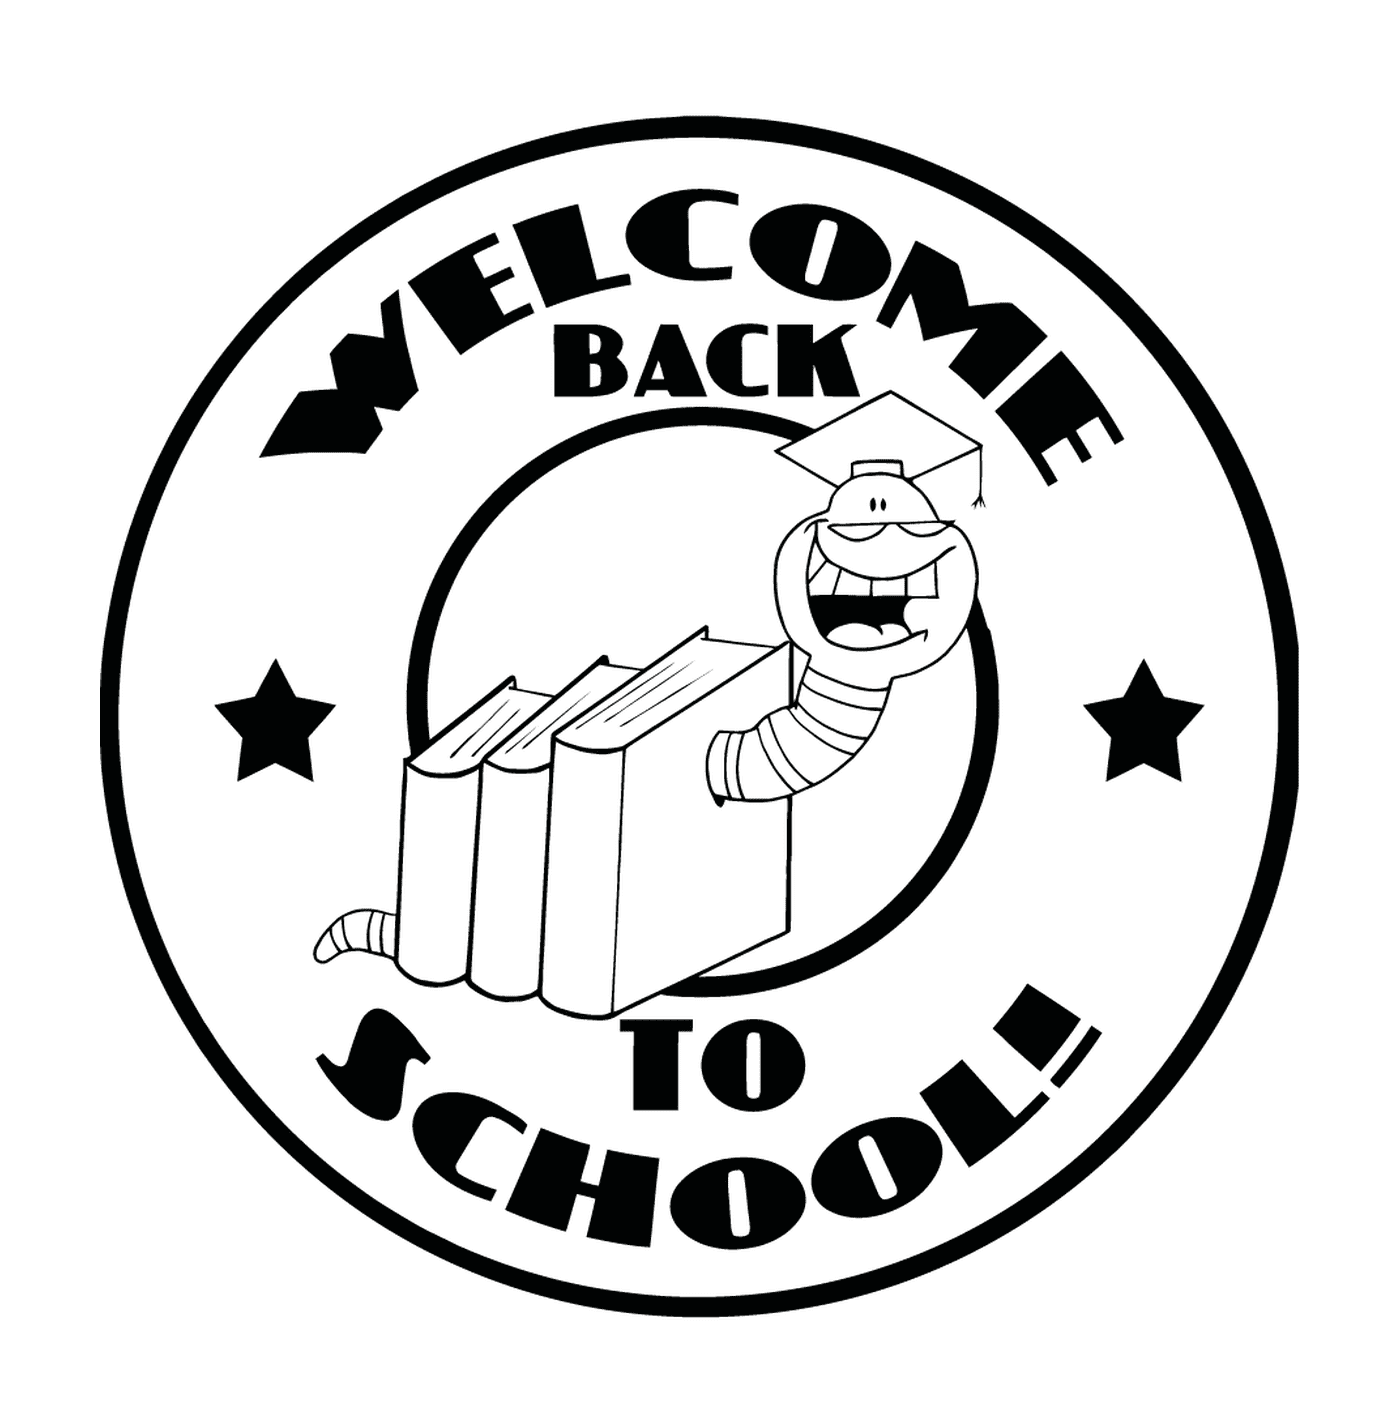  Back-to-school stamp 